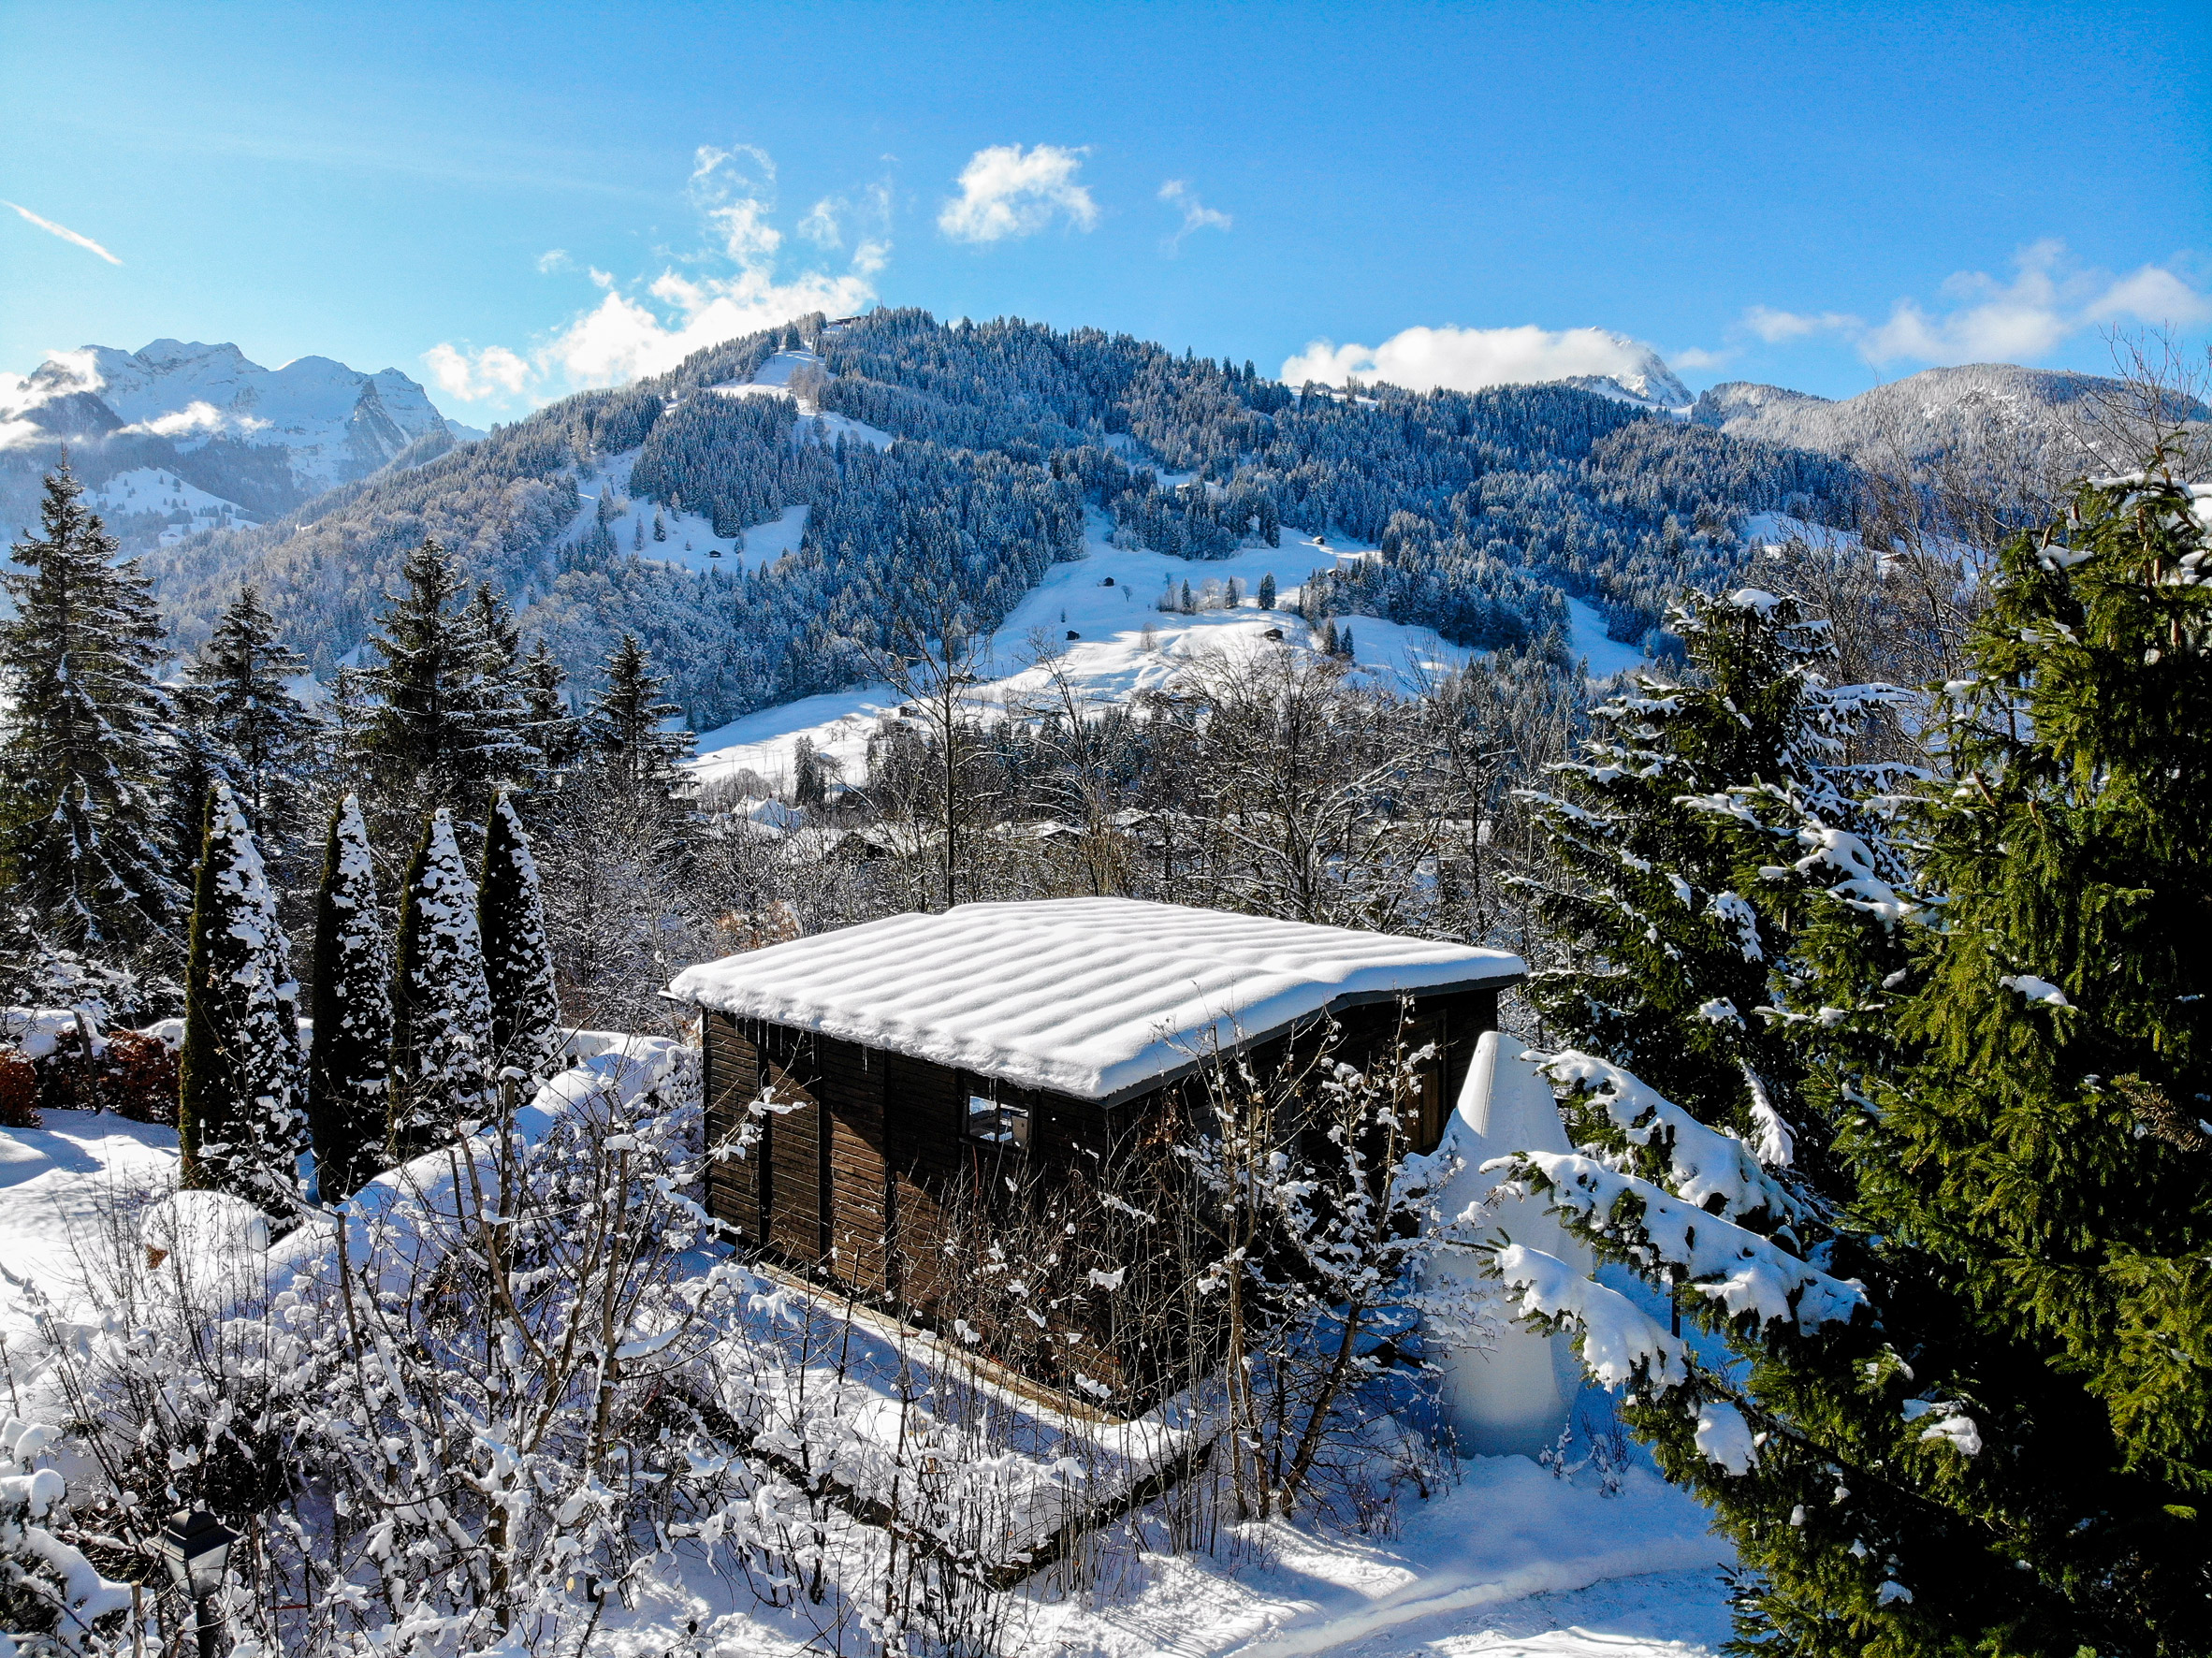 Jean Prouve demountable house at The Alpina Gstaad